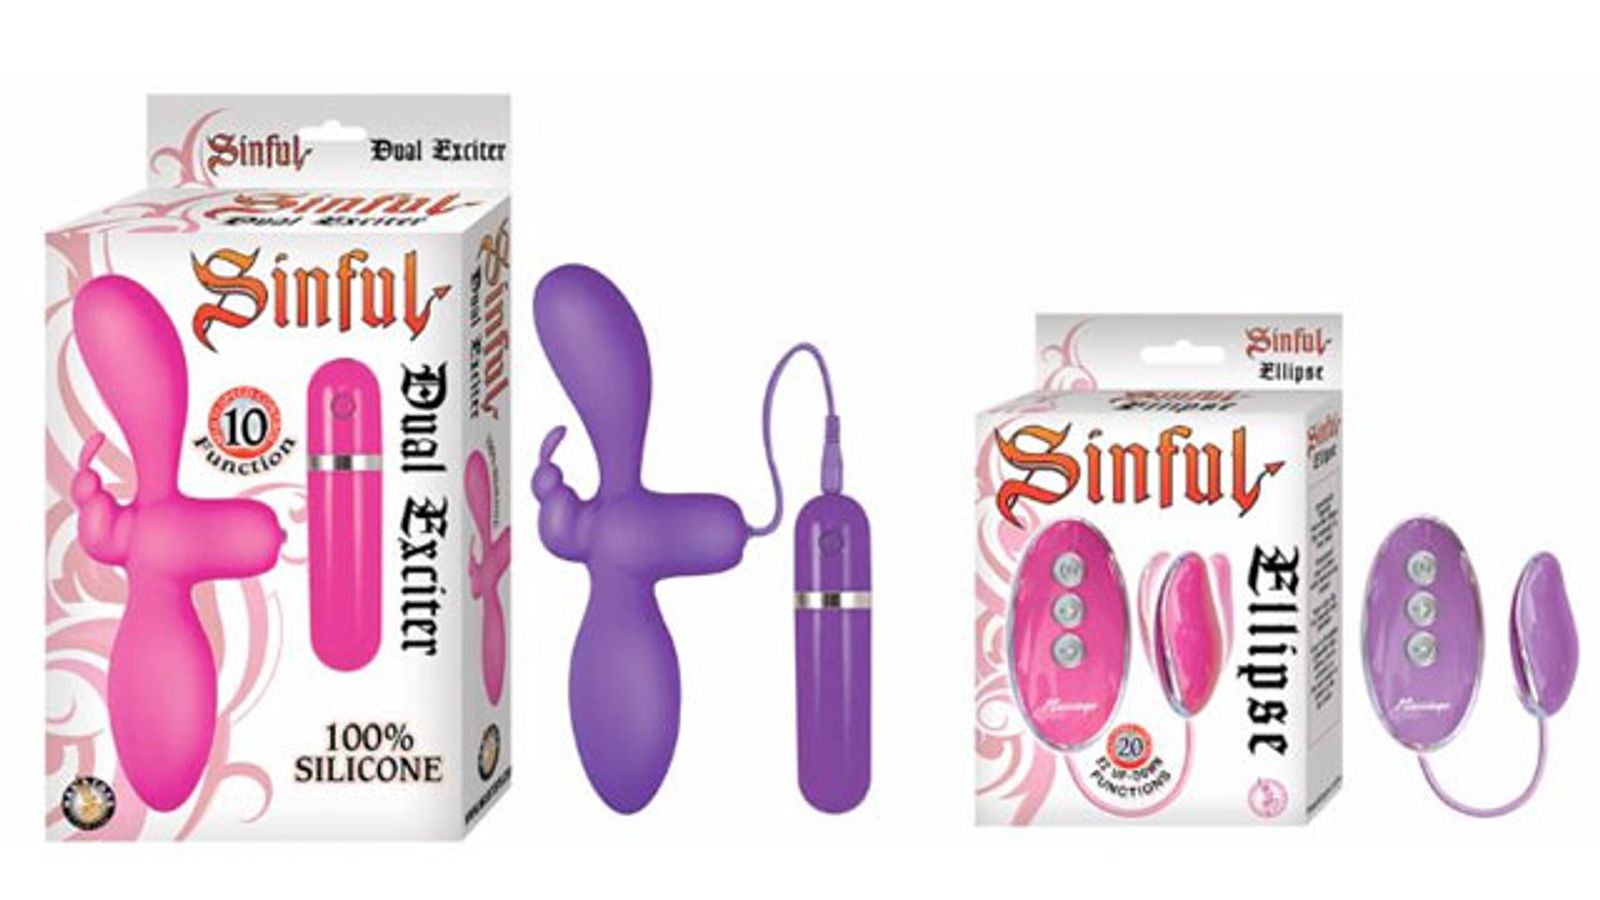 Nasstoys Expands Sinful Collection With Affordable, Function-Loaded Items